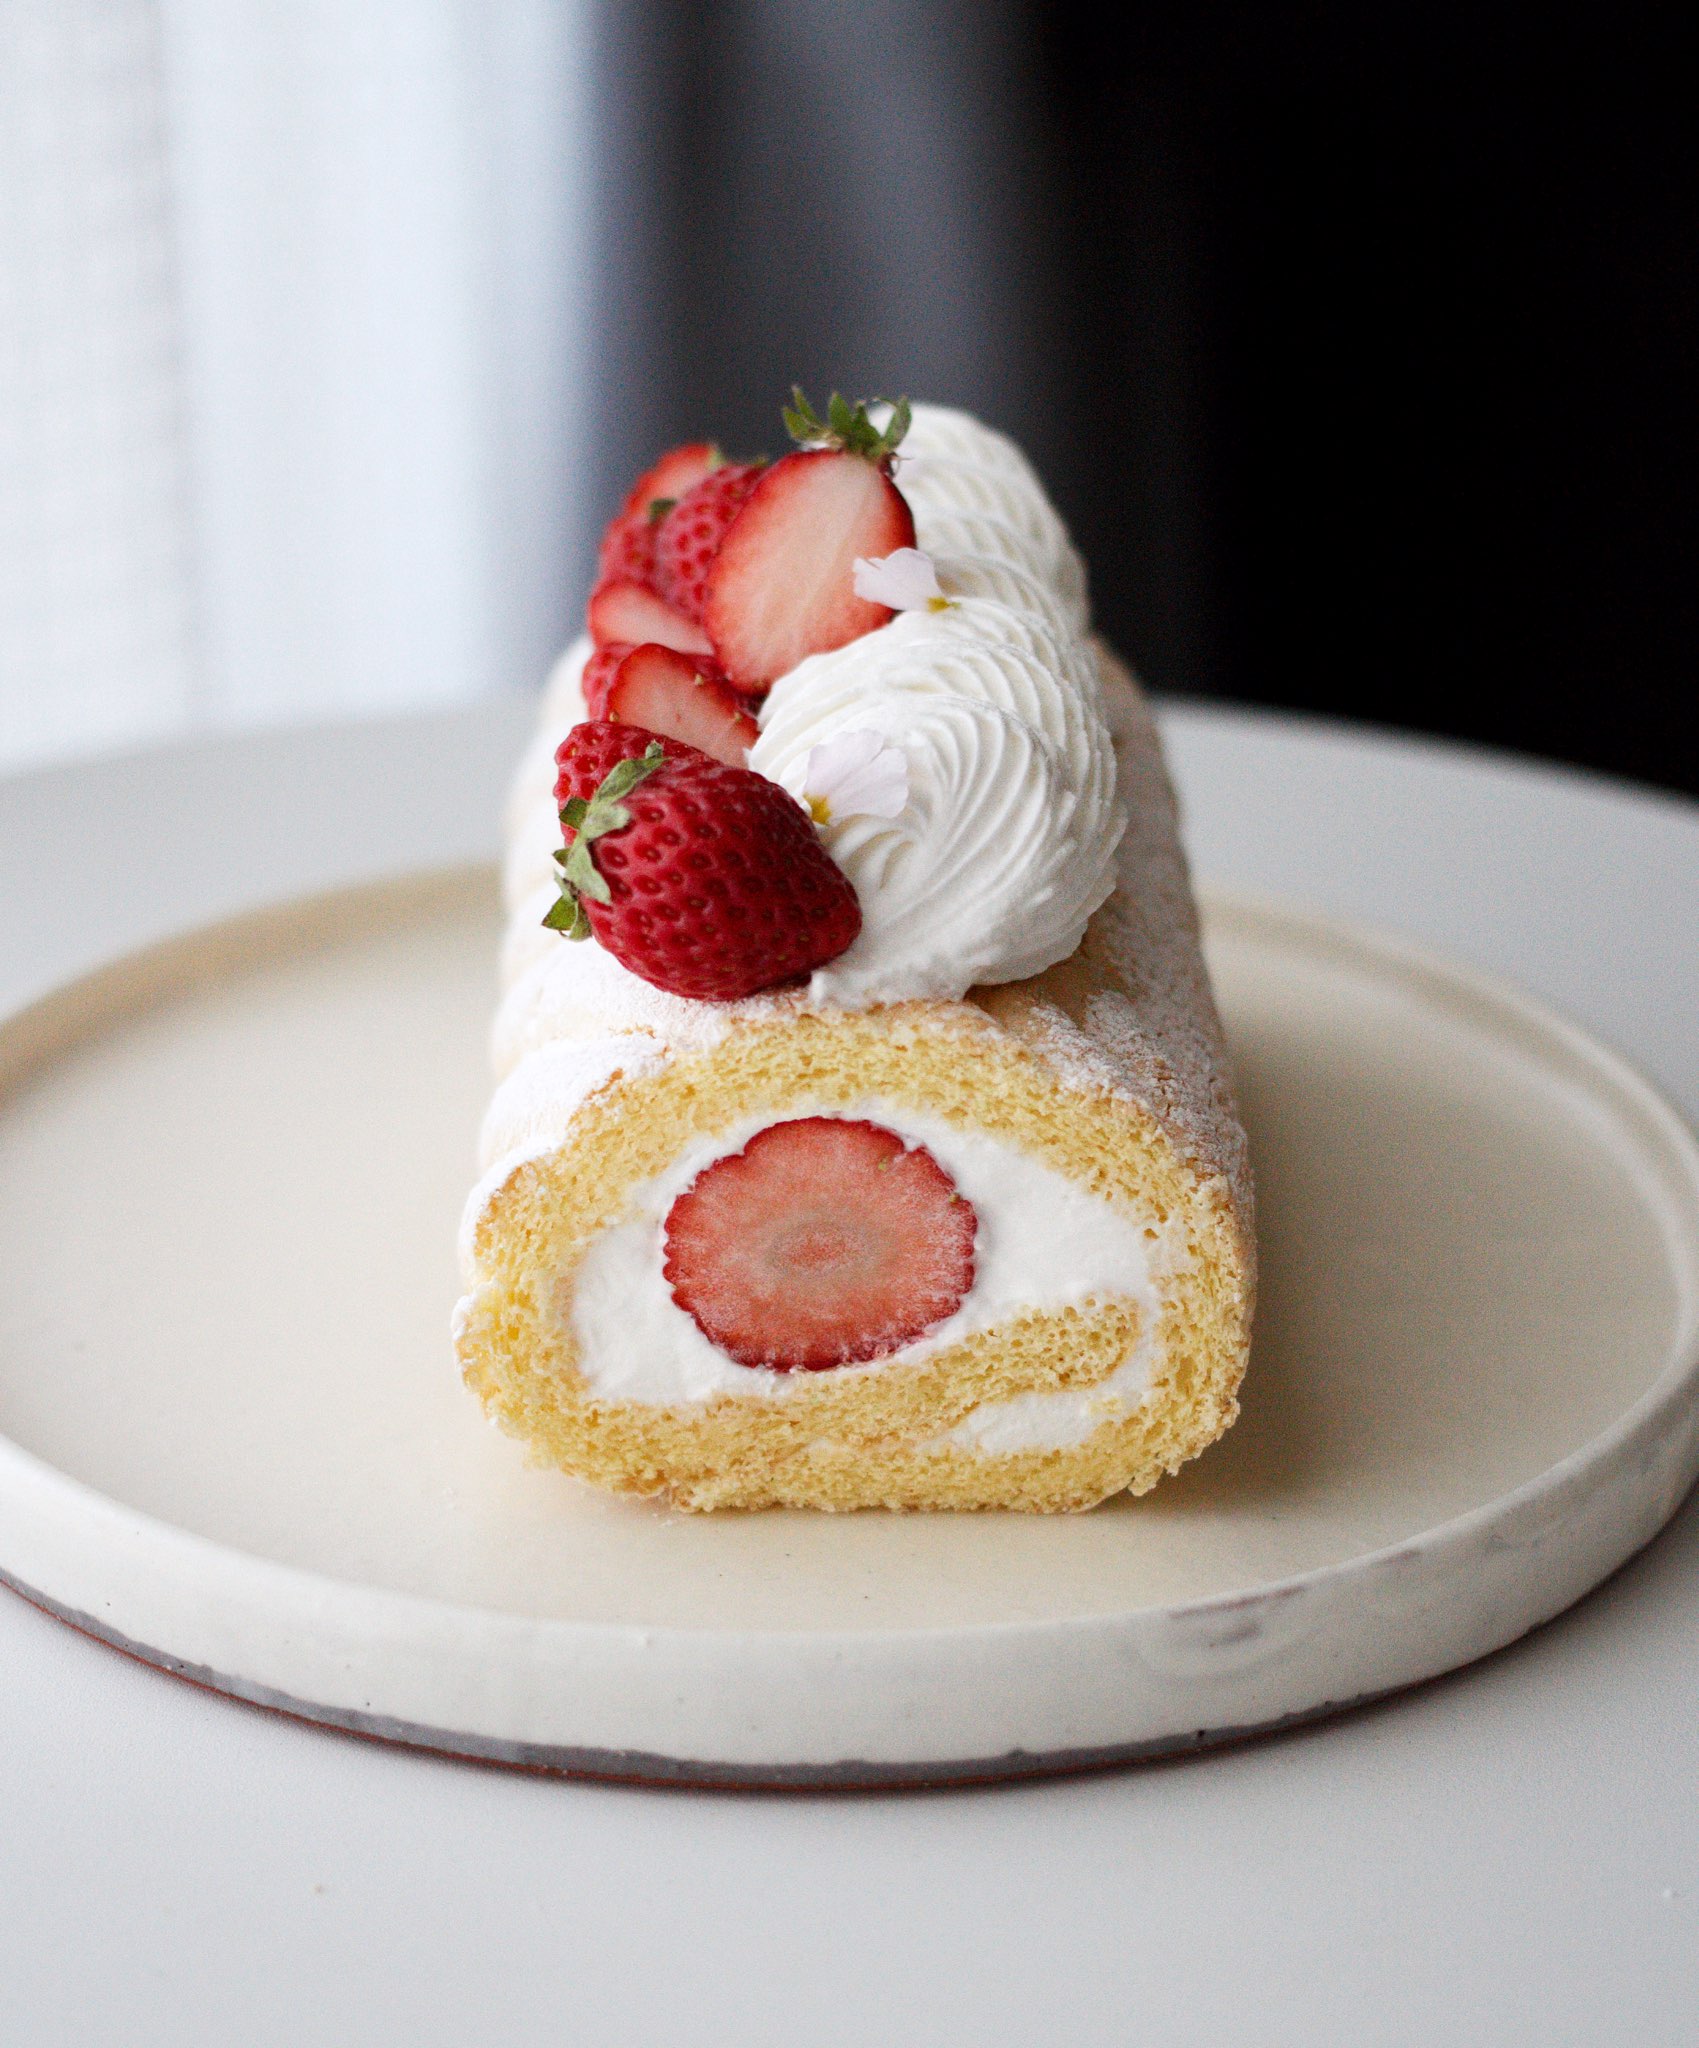 How To Make A Swiss Roll Cake | Emma Duckworth Bakes